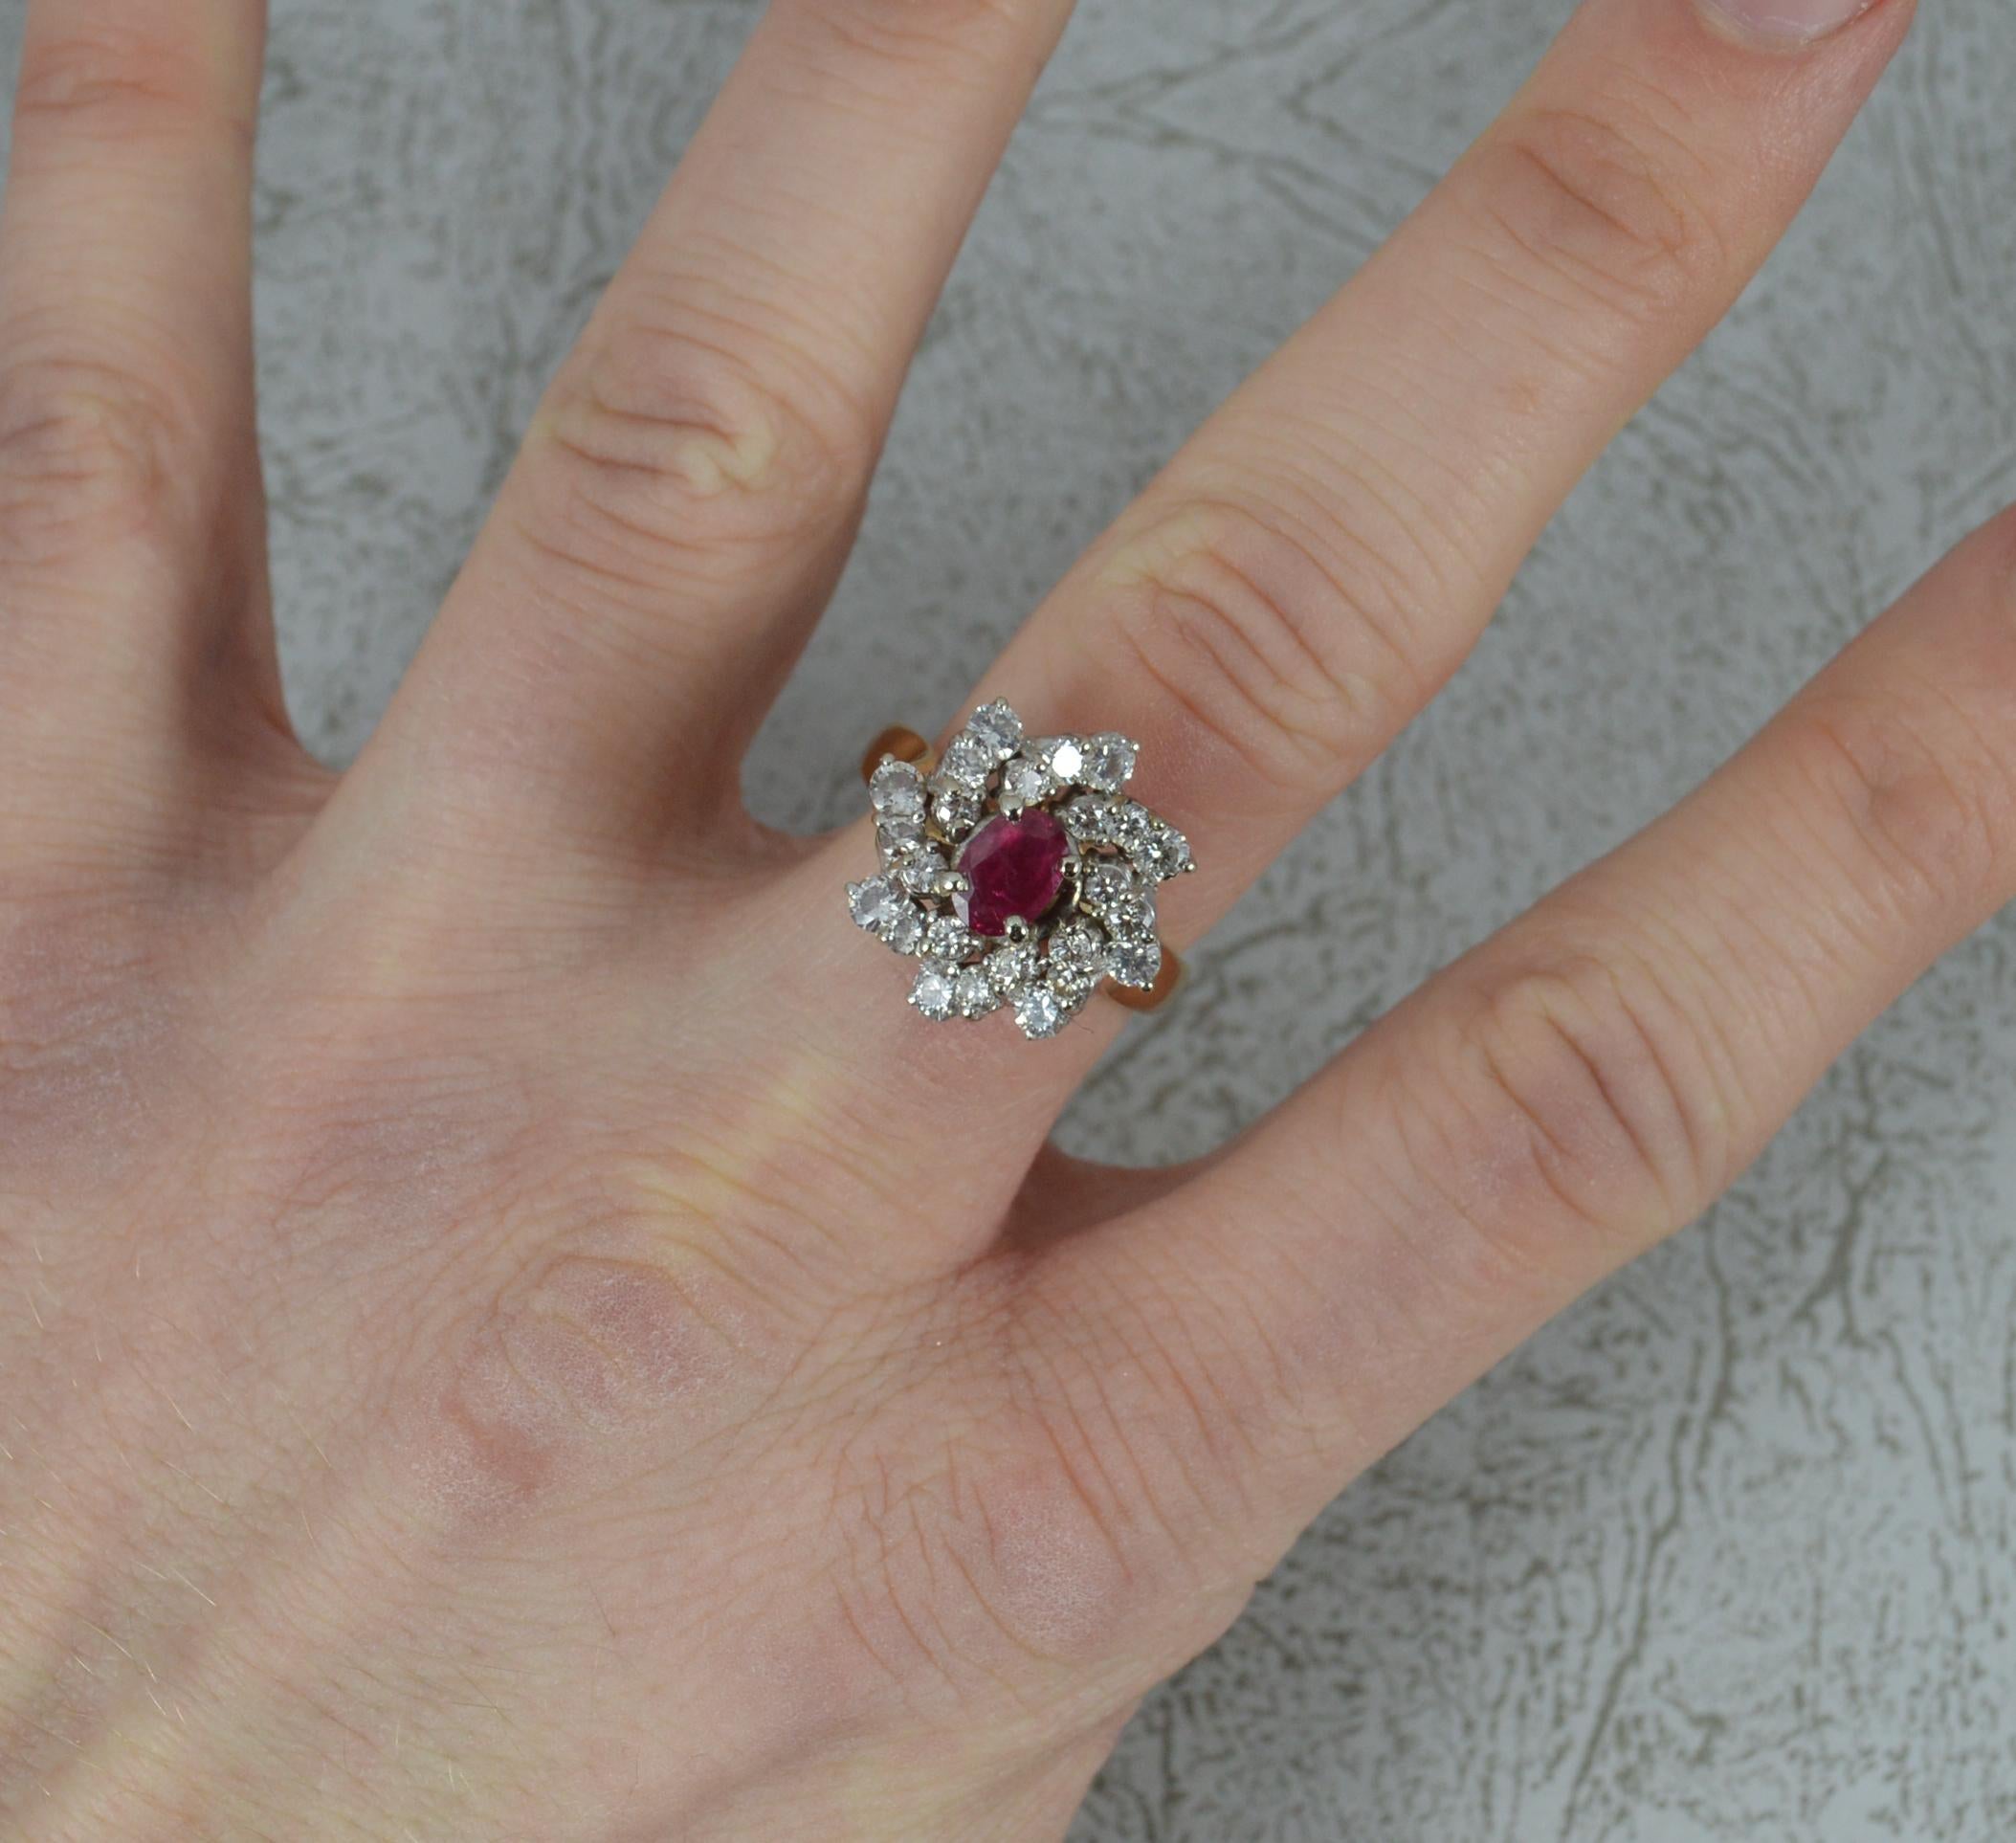 A stunning ladies cluster ring.
14 carat yellow gold shank and white gold head setting.
Designed with an oval cut ruby to the centre, 4.6mm x 6.5mm approx in a four claw setting. Surrounding are 24 natural round brilliant cut diamonds on a twist